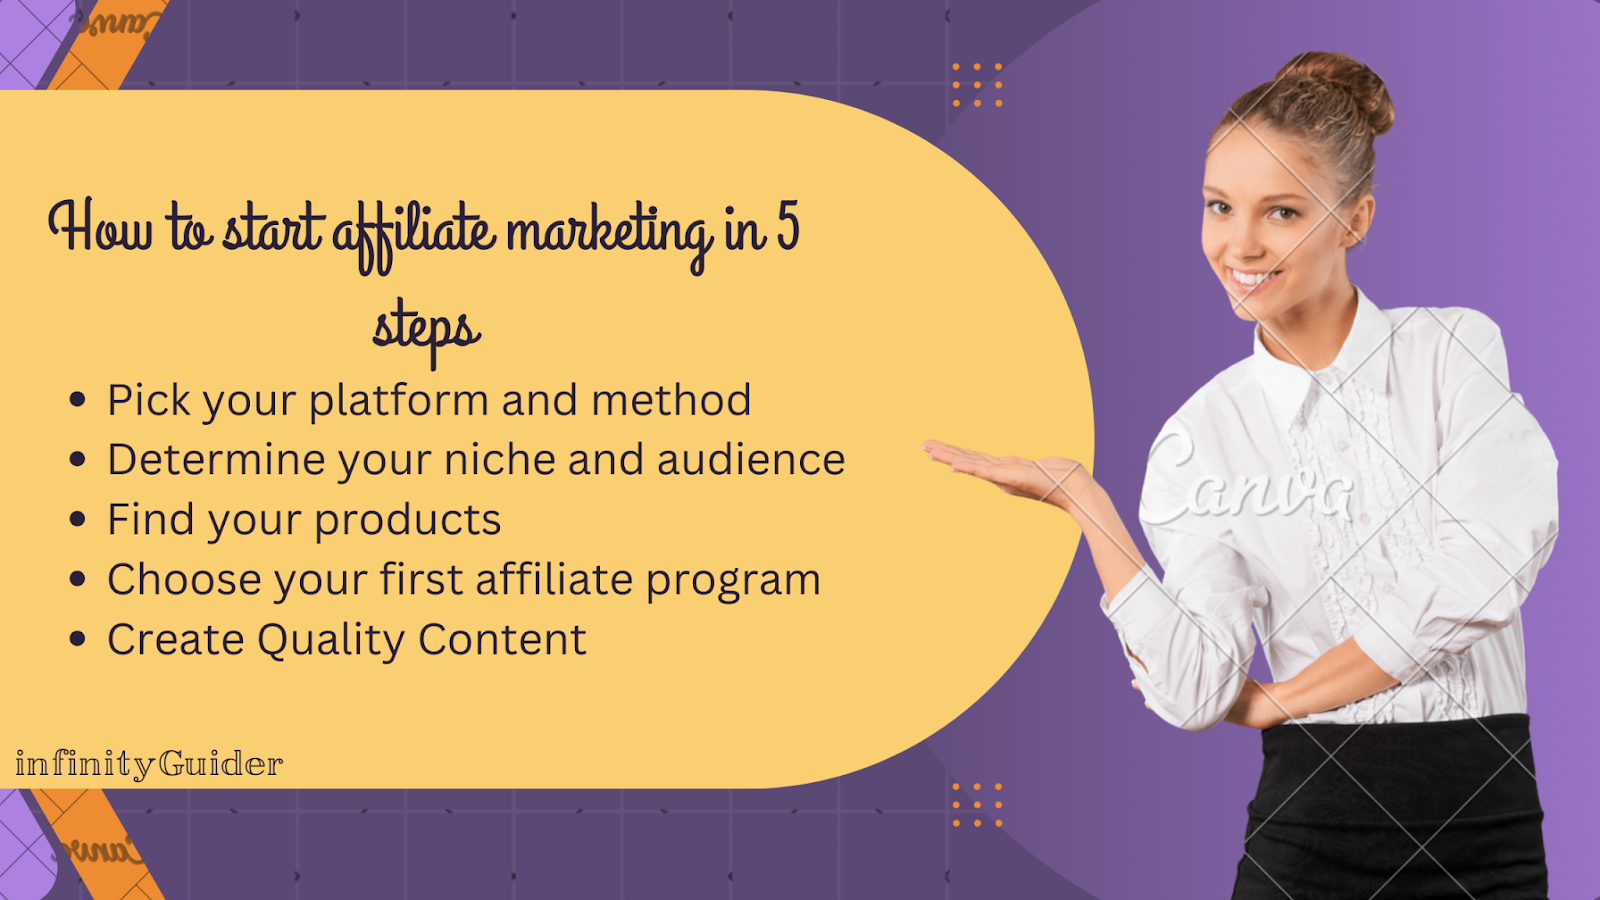 How to start affiliate marketing in 5 steps